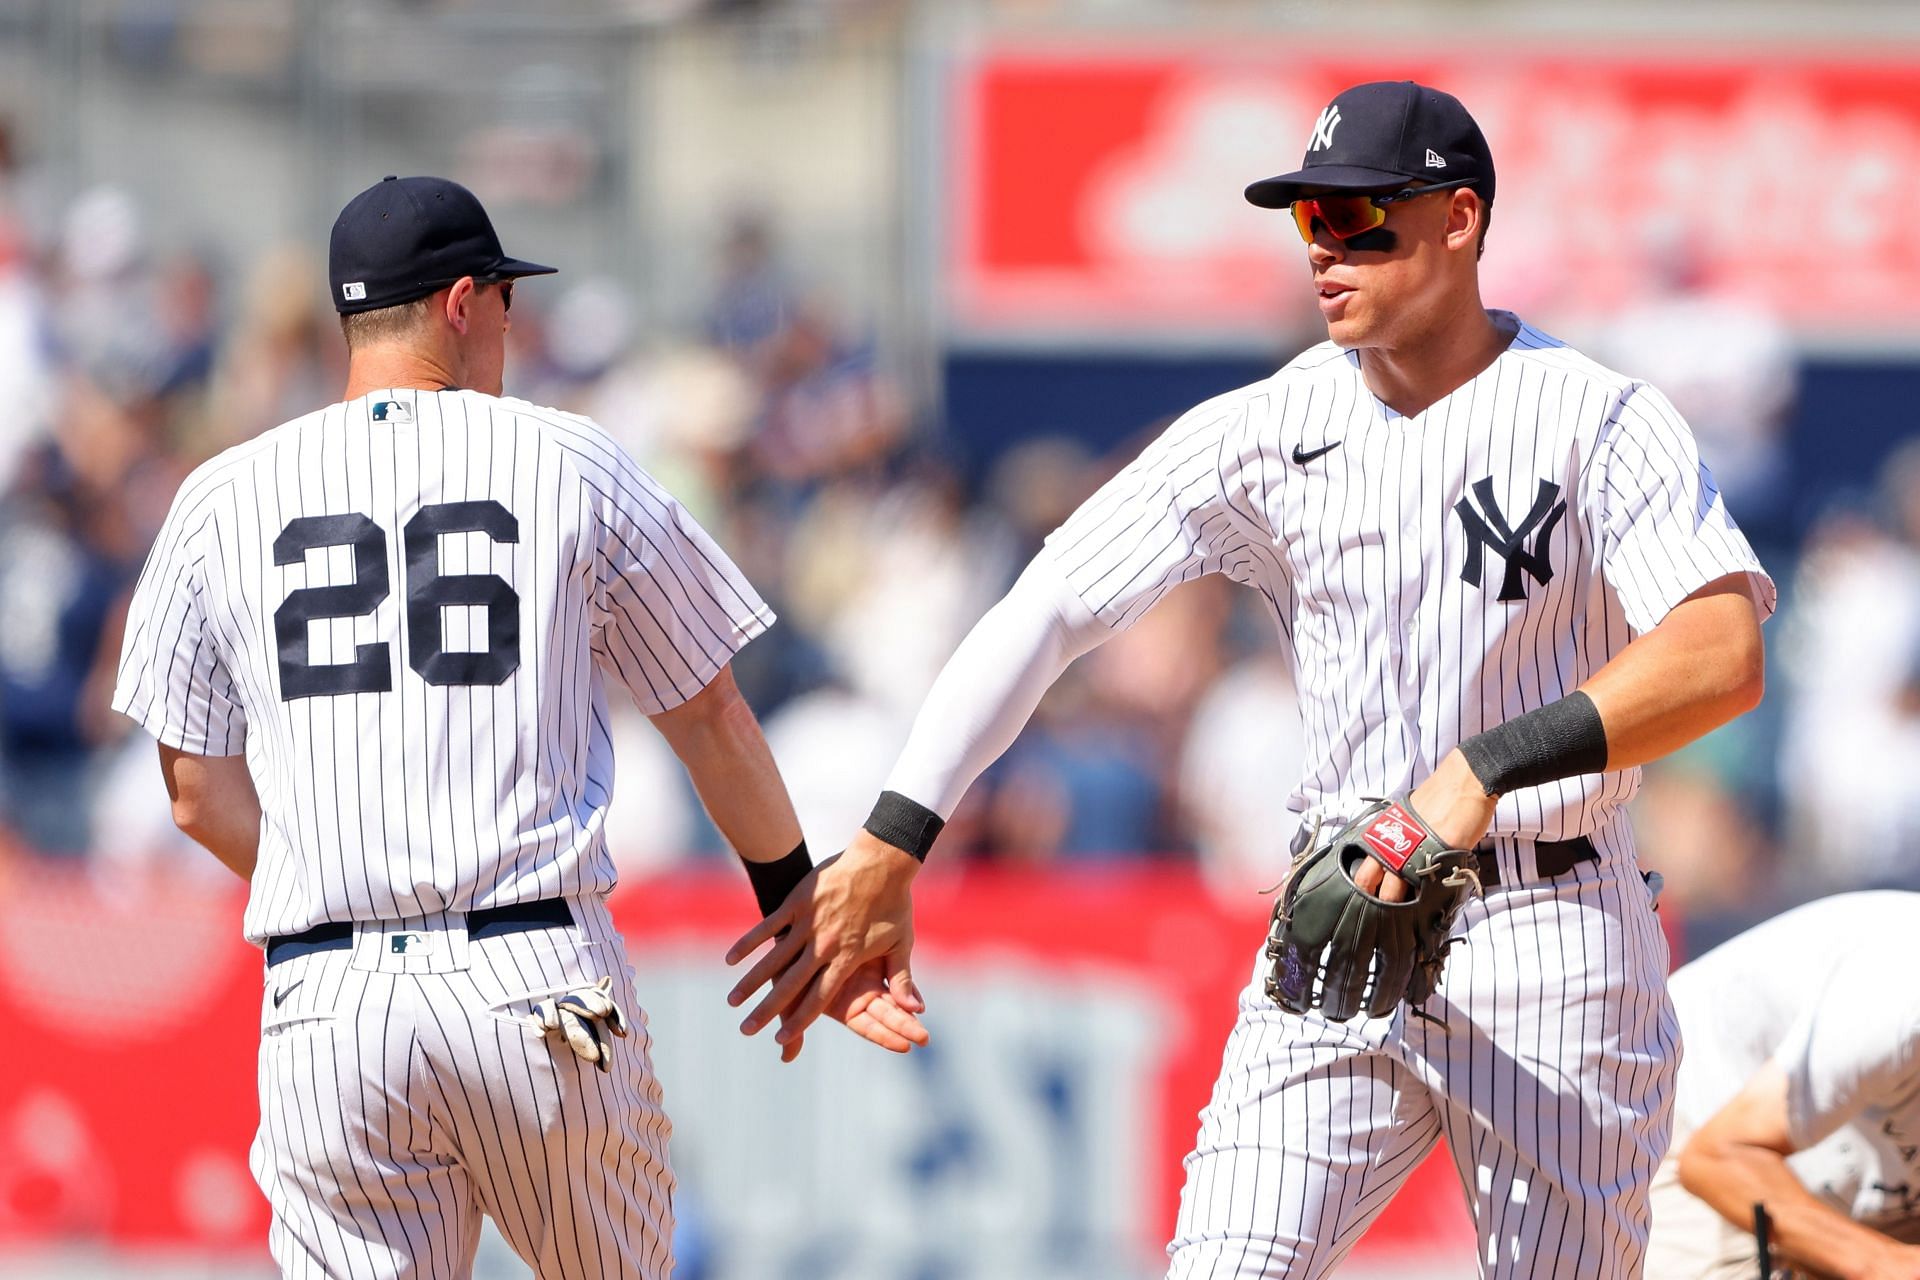 The New York Yankees have the best record for the month of June.